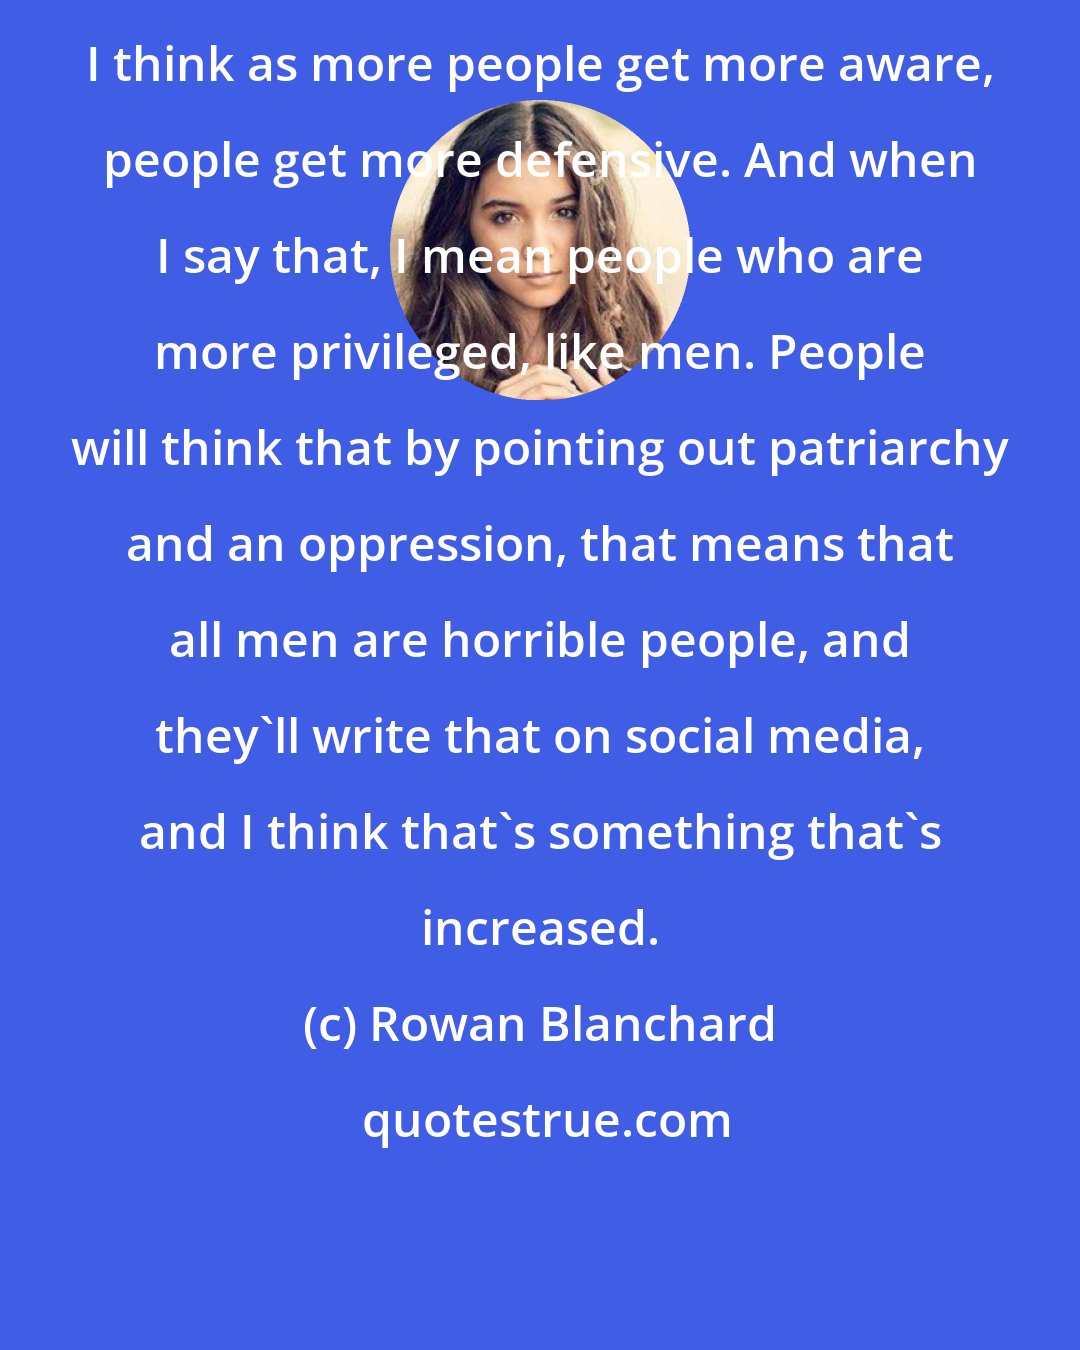 Rowan Blanchard: I think as more people get more aware, people get more defensive. And when I say that, I mean people who are more privileged, like men. People will think that by pointing out patriarchy and an oppression, that means that all men are horrible people, and they'll write that on social media, and I think that's something that's increased.